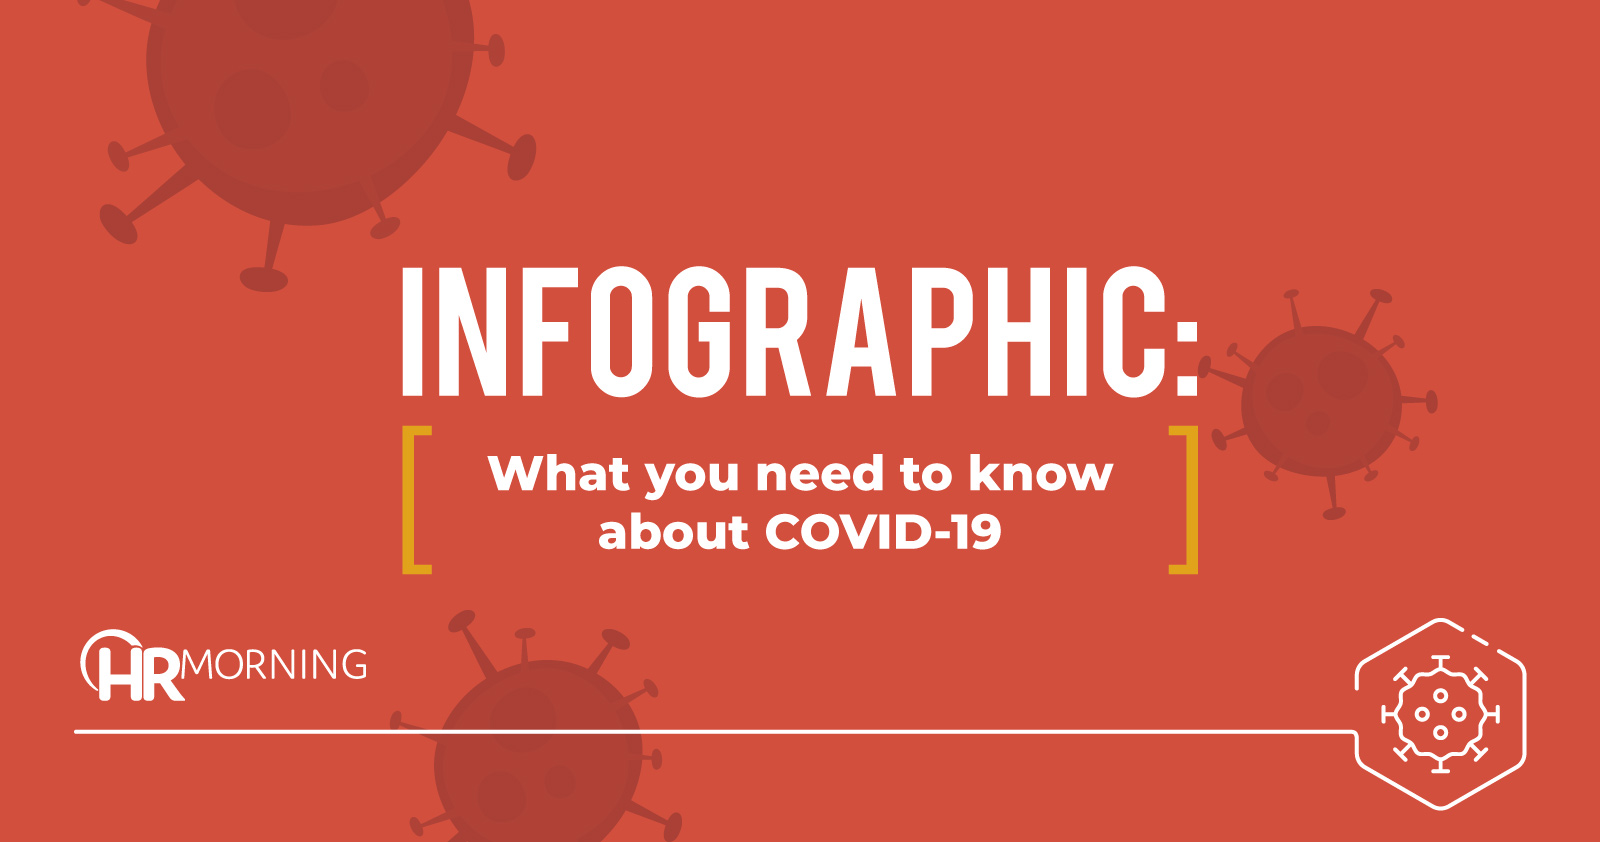 Infographic: What you need to know about COVID-19